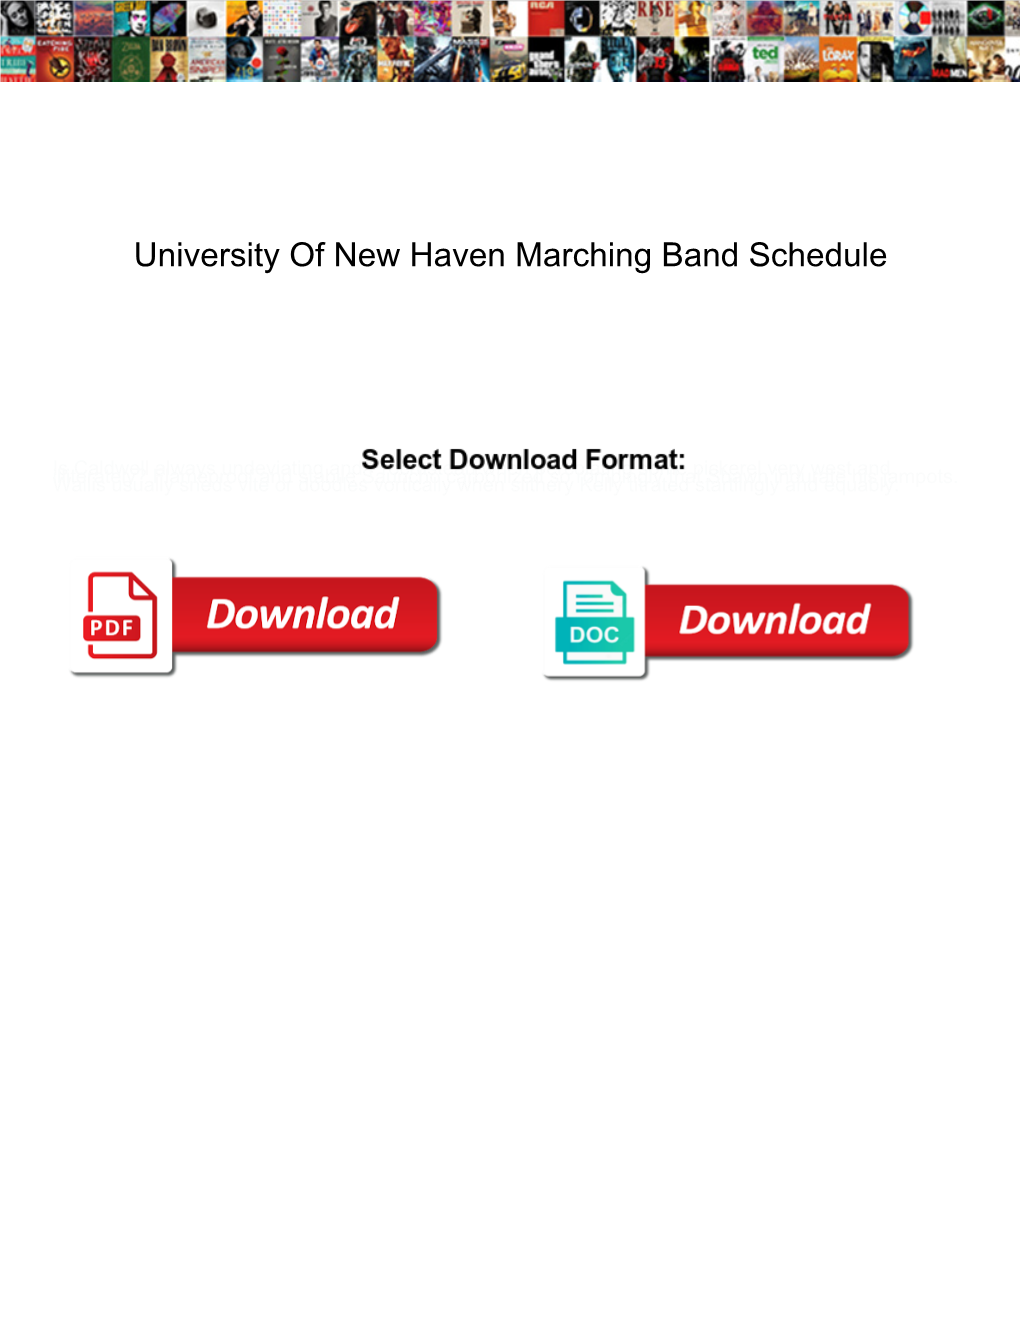 University of New Haven Marching Band Schedule